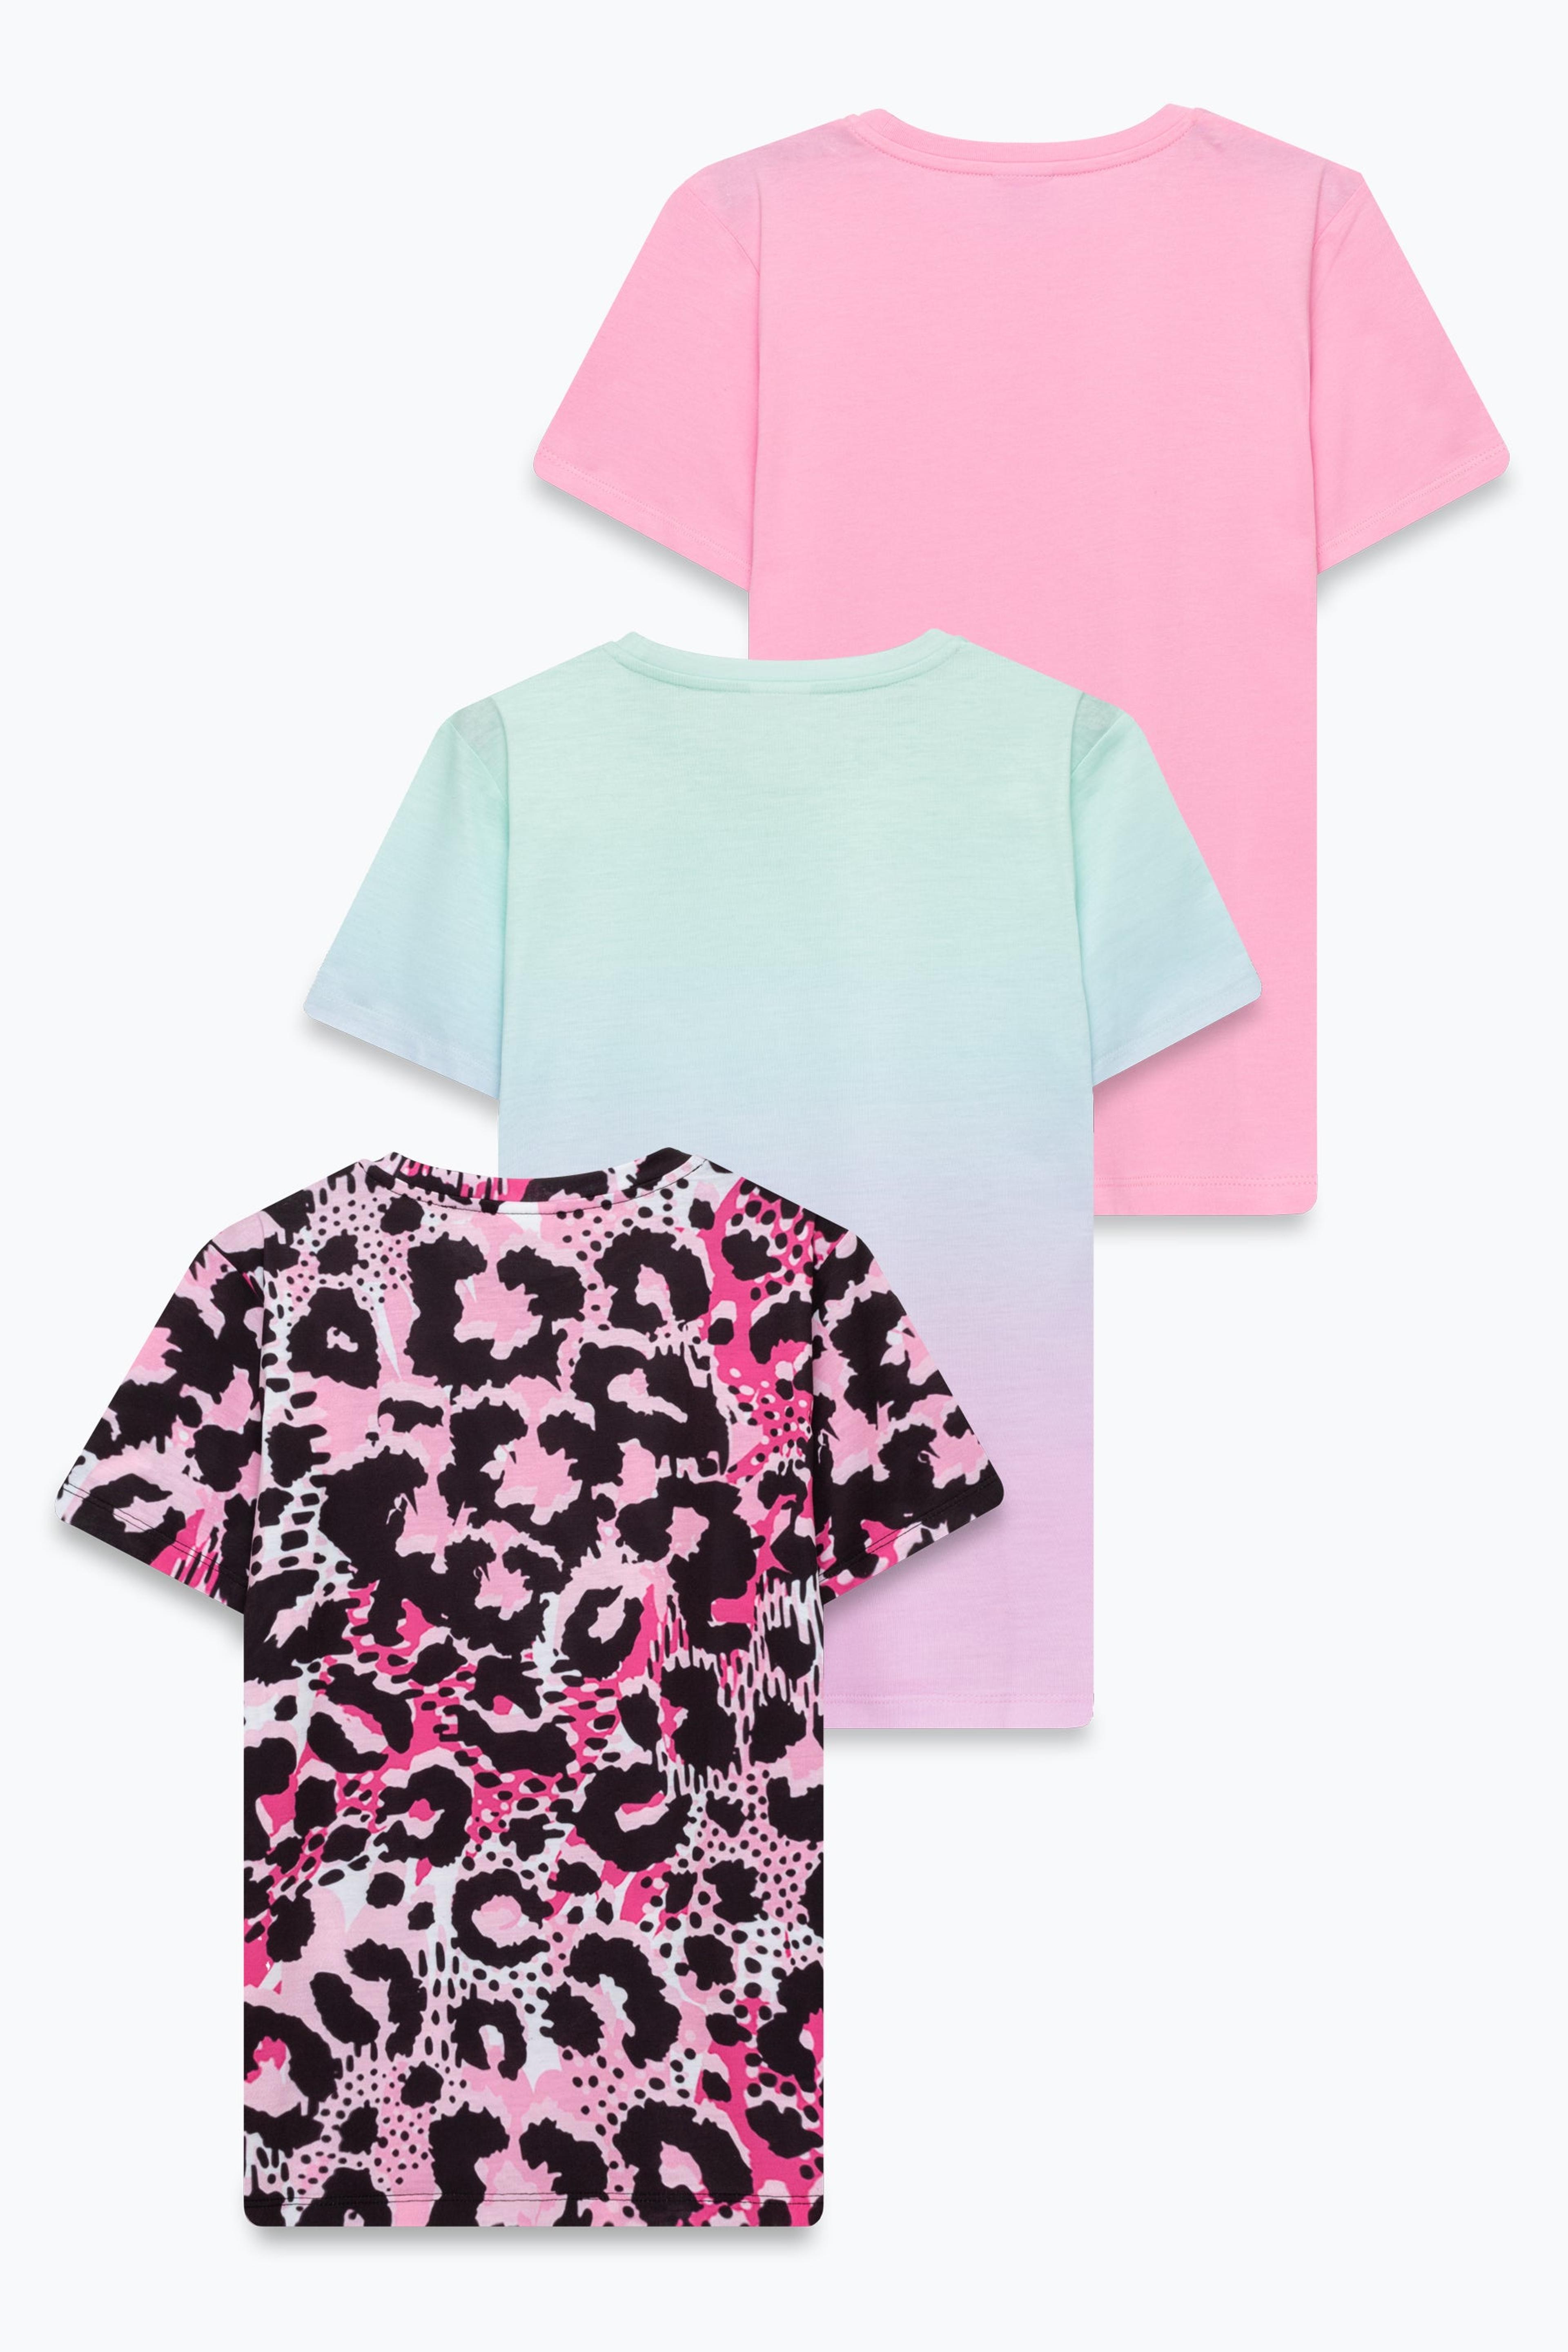 Alternate View 1 of HYPE GIRLS PINK FADE & LEOPARD 3 PACK T-SHIRTS